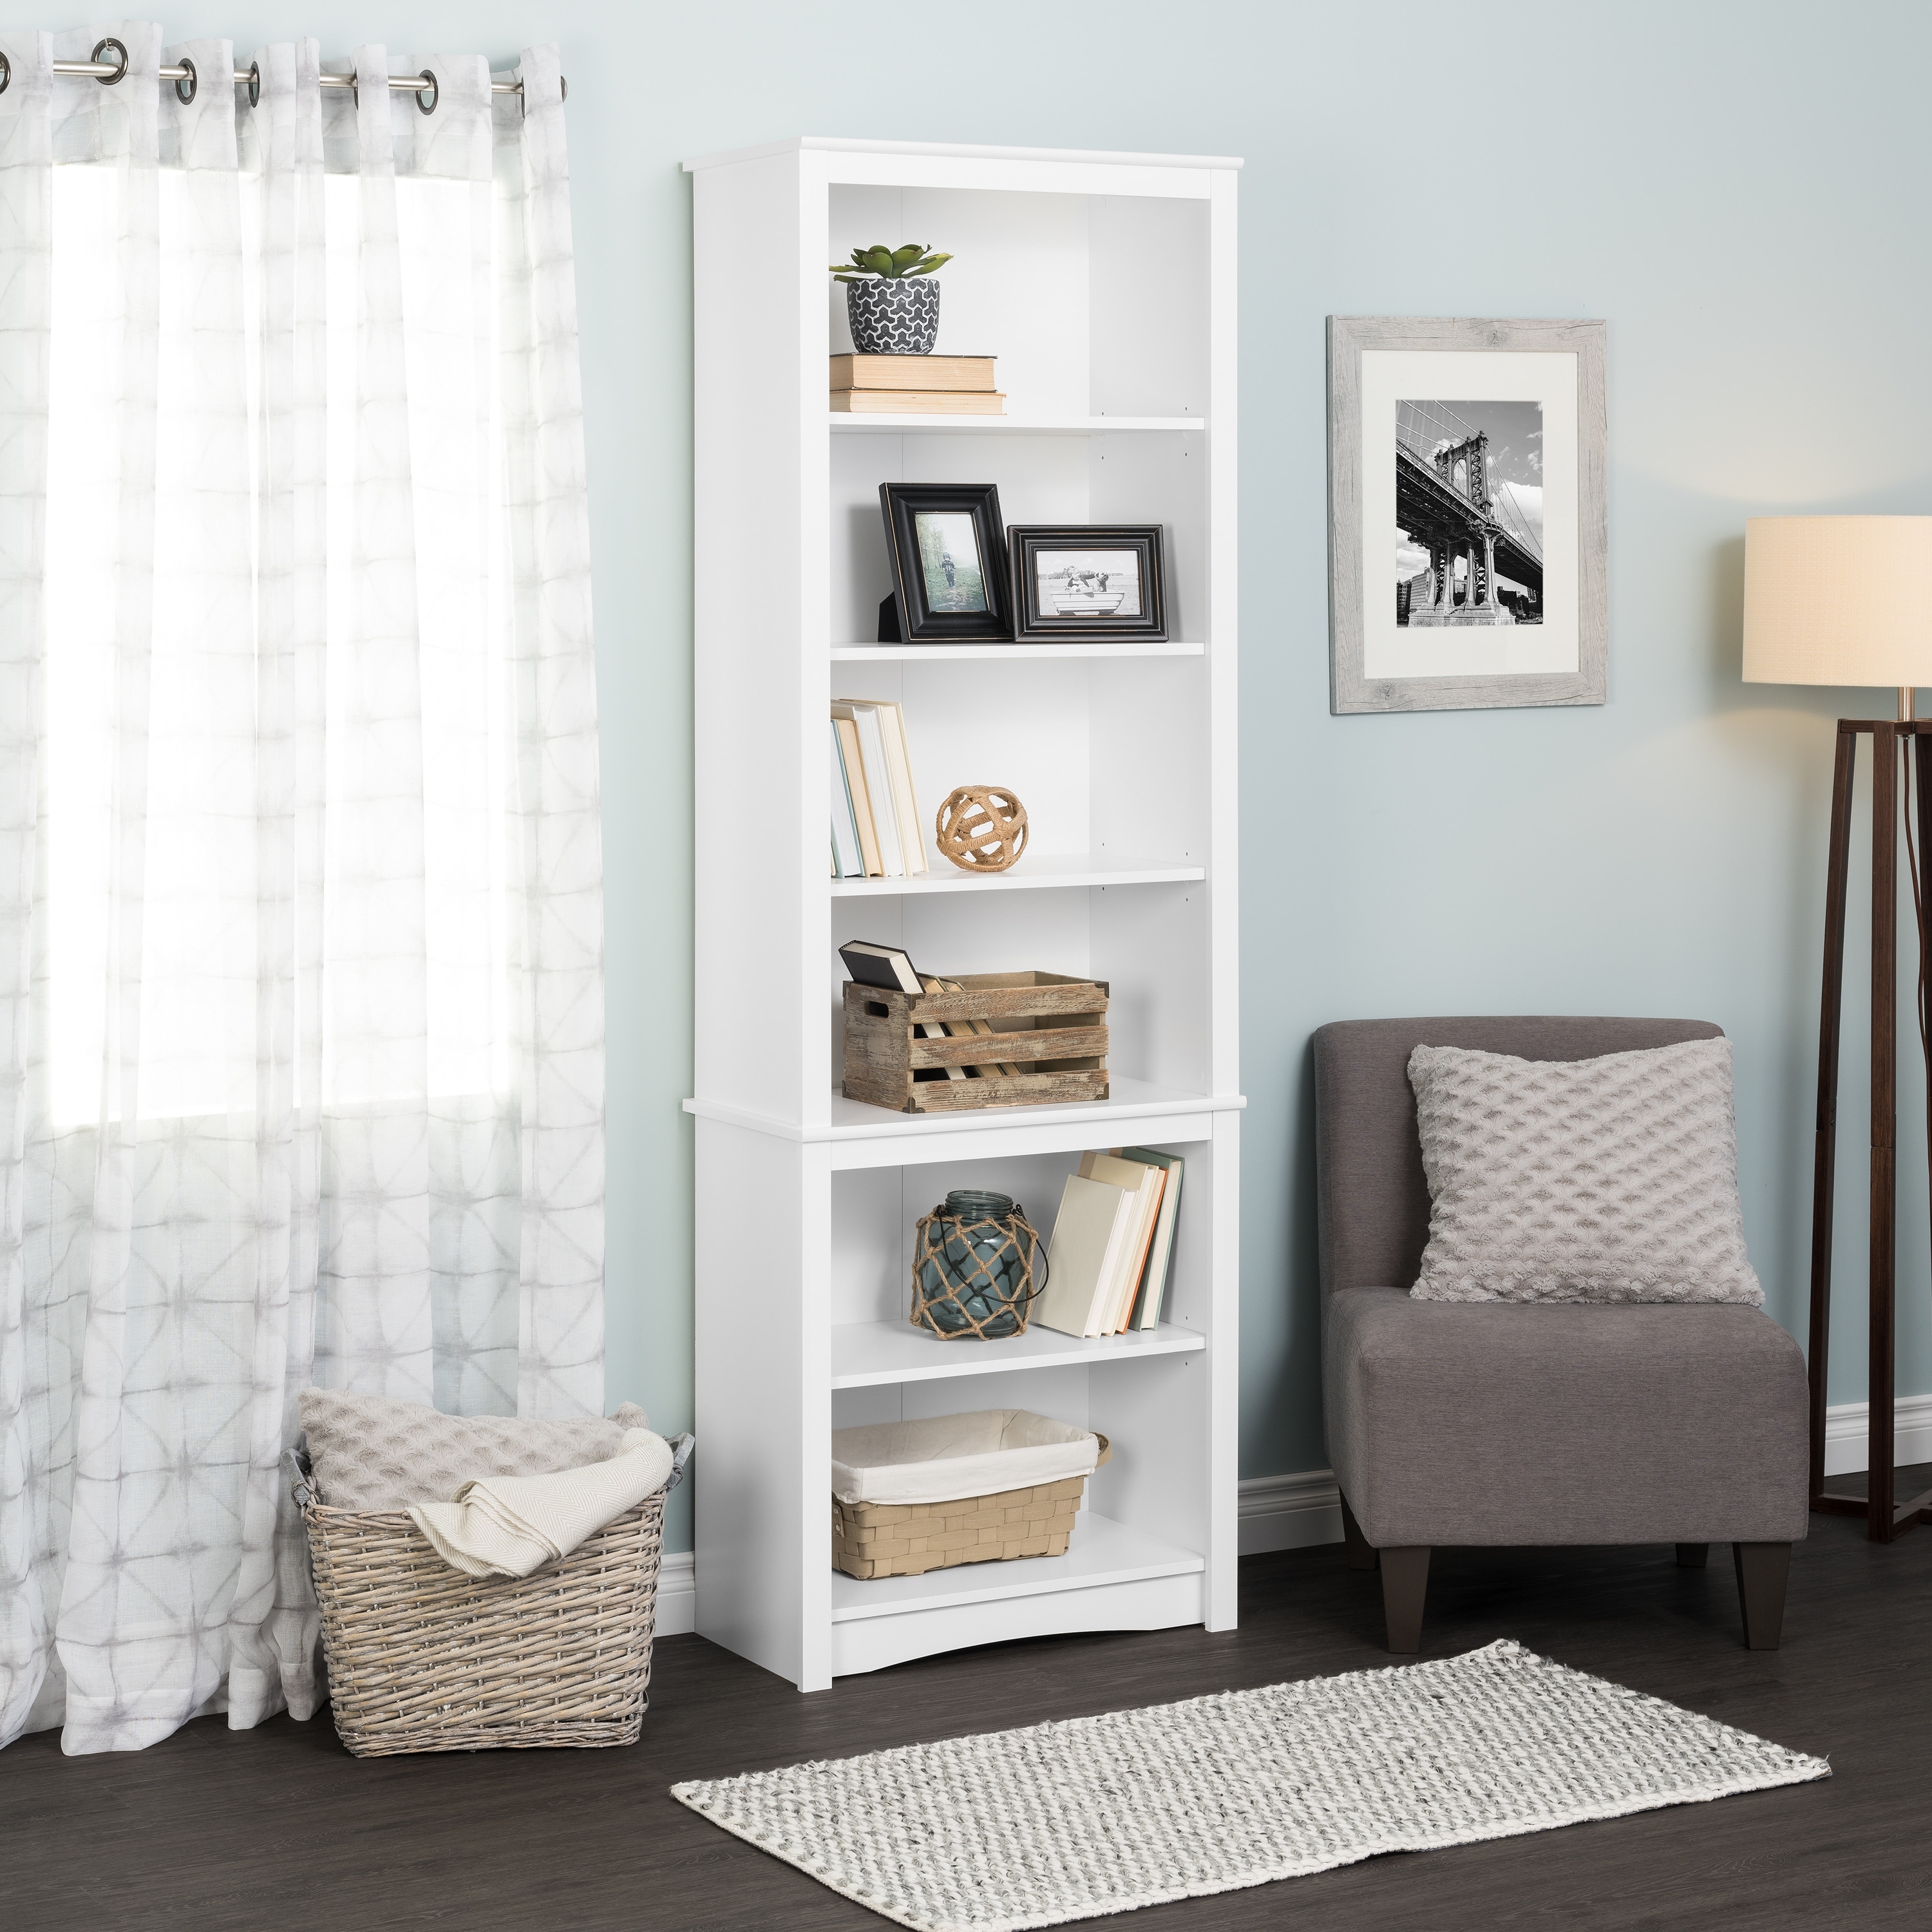 https://ak1.ostkcdn.com/images/products/is/images/direct/e51e26a76d3cc8837f2b51cdd6cb90f1ed164293/Tall-Bookcase%2C-White.jpg